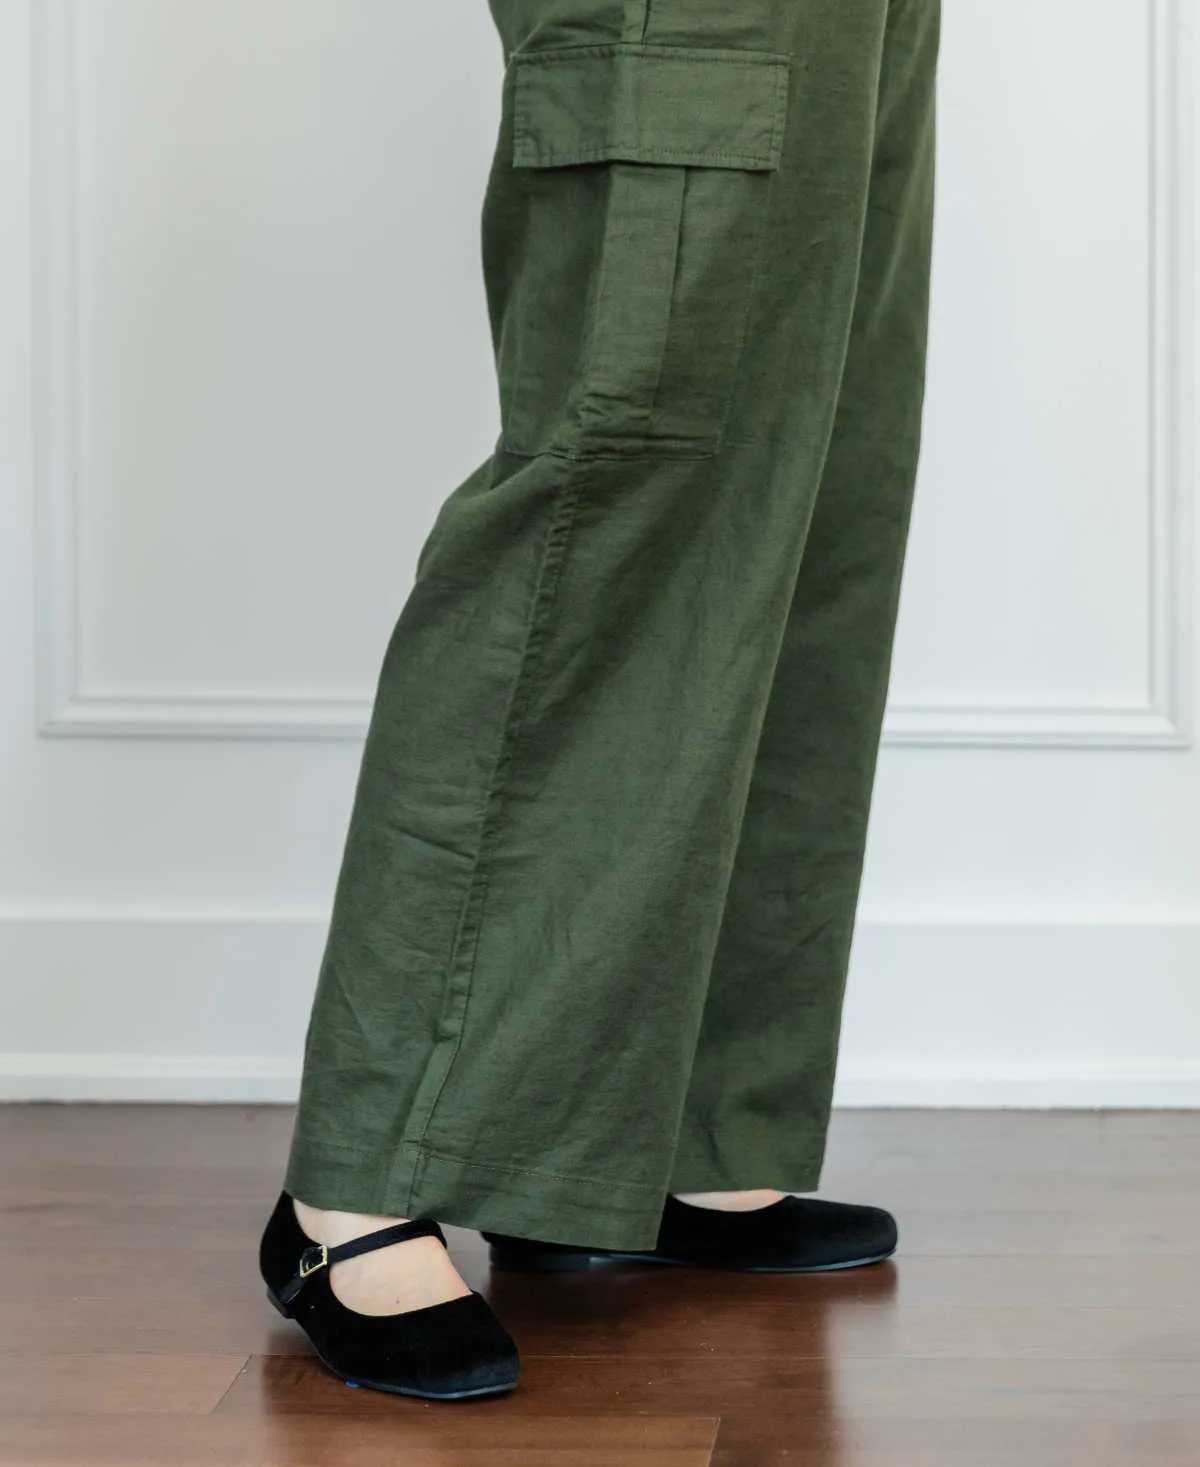 Cropped view of woman's legs wearing Mary Jane Ballet flats with full length wide olive green linen pants.